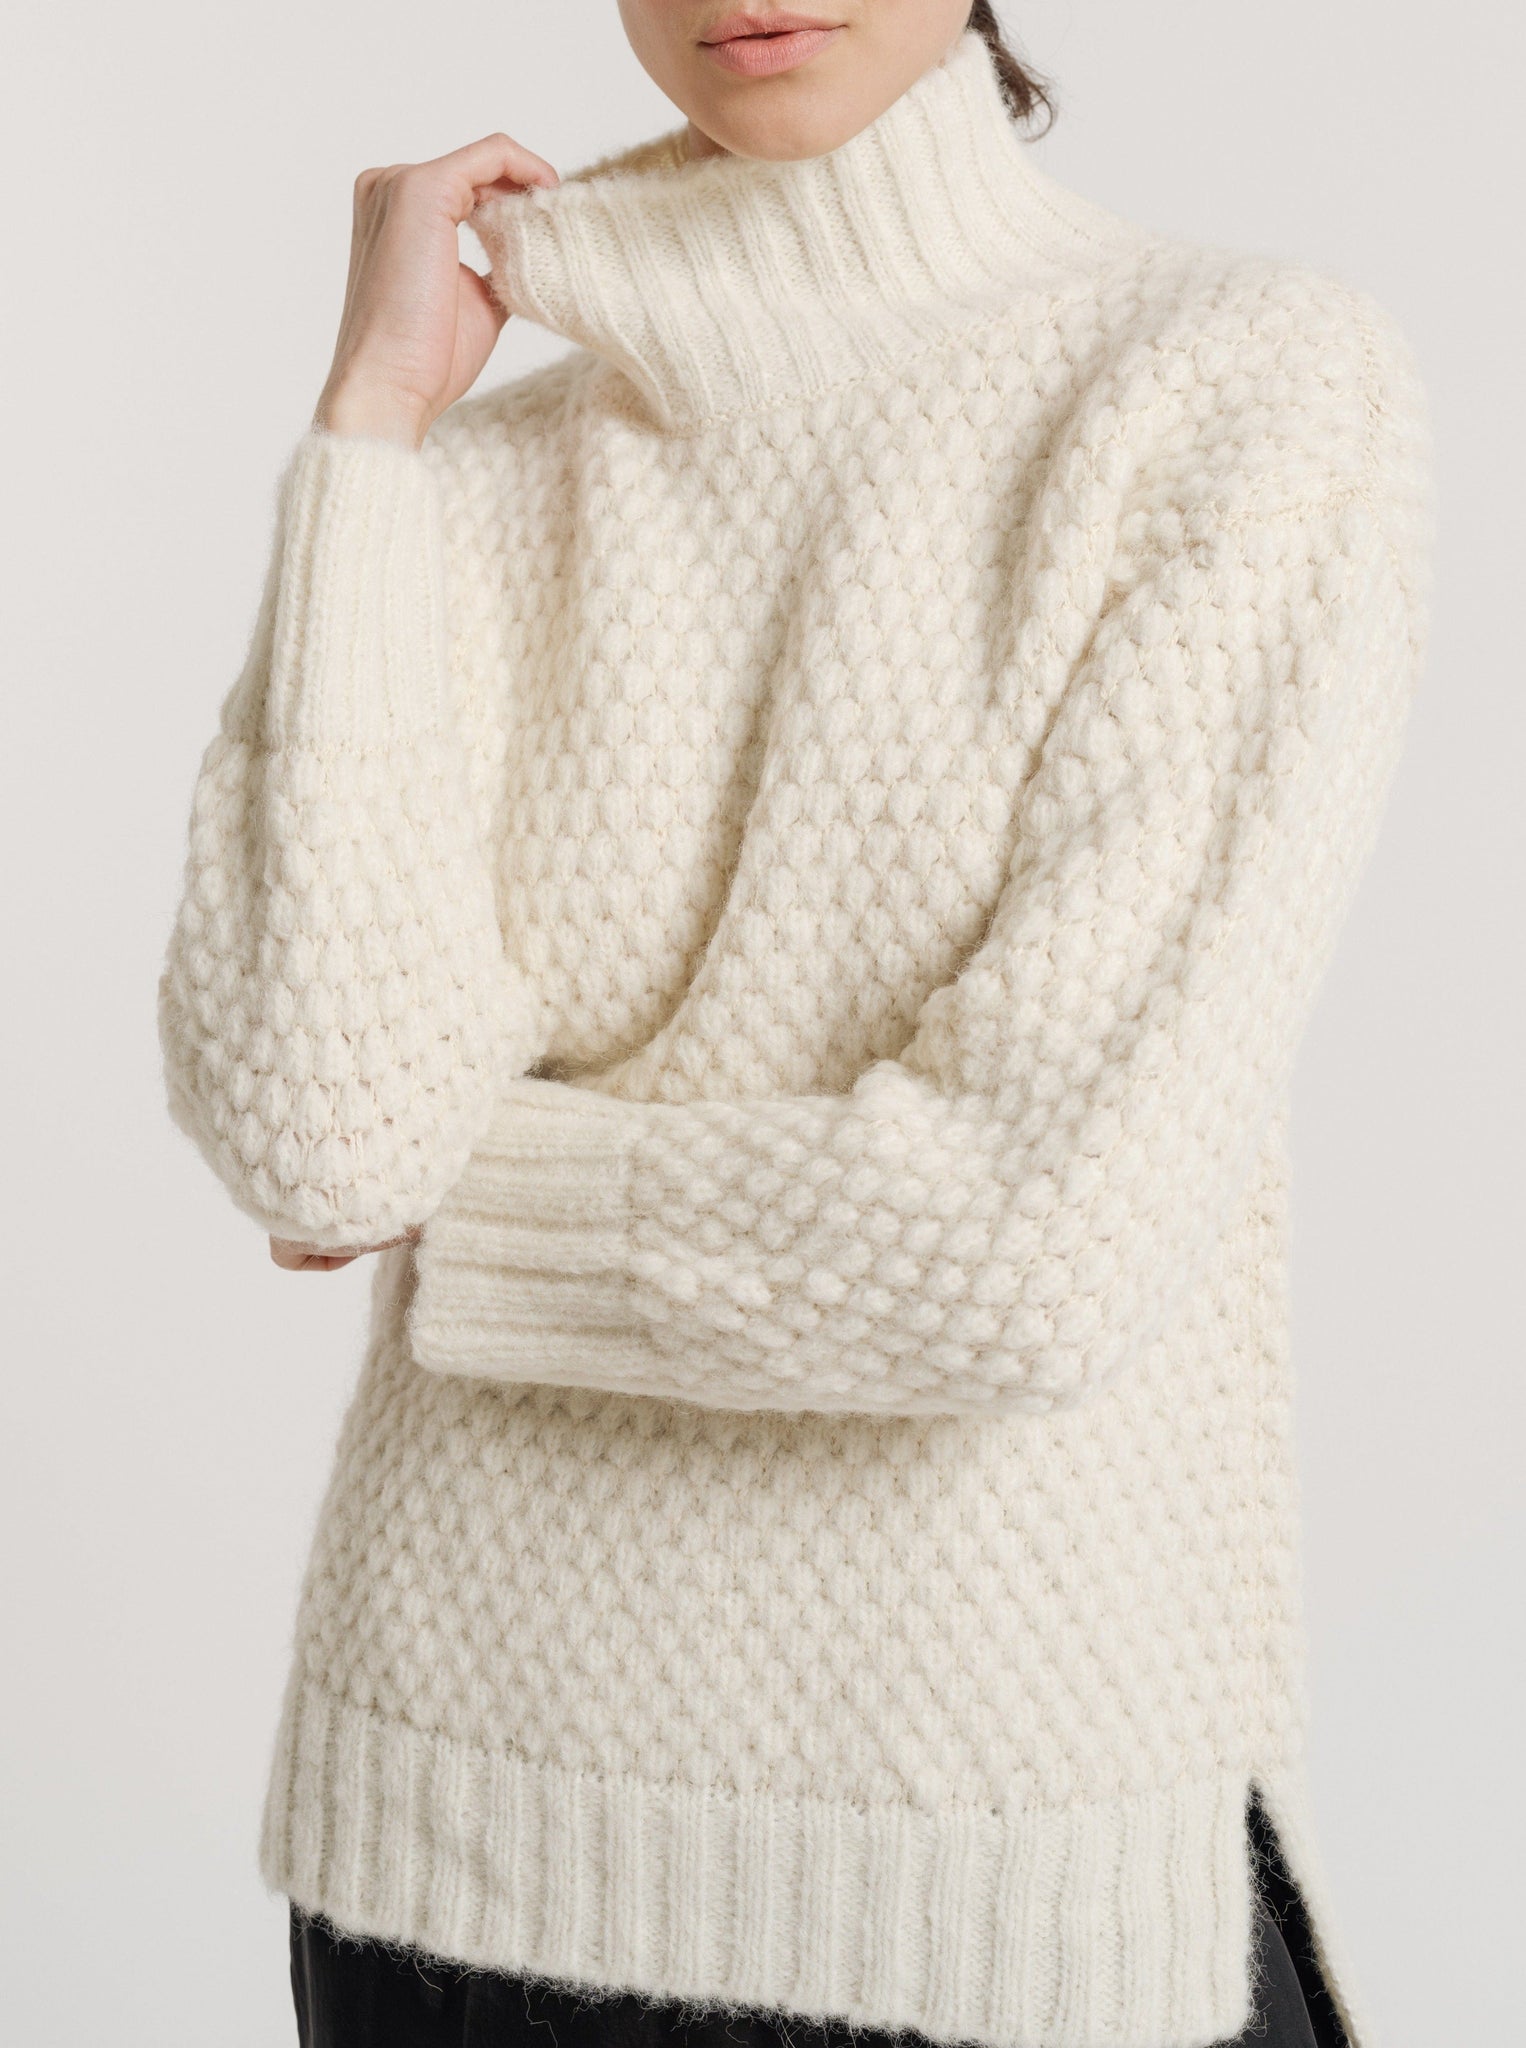 Bauble Sweater - Ivory - S - Sample